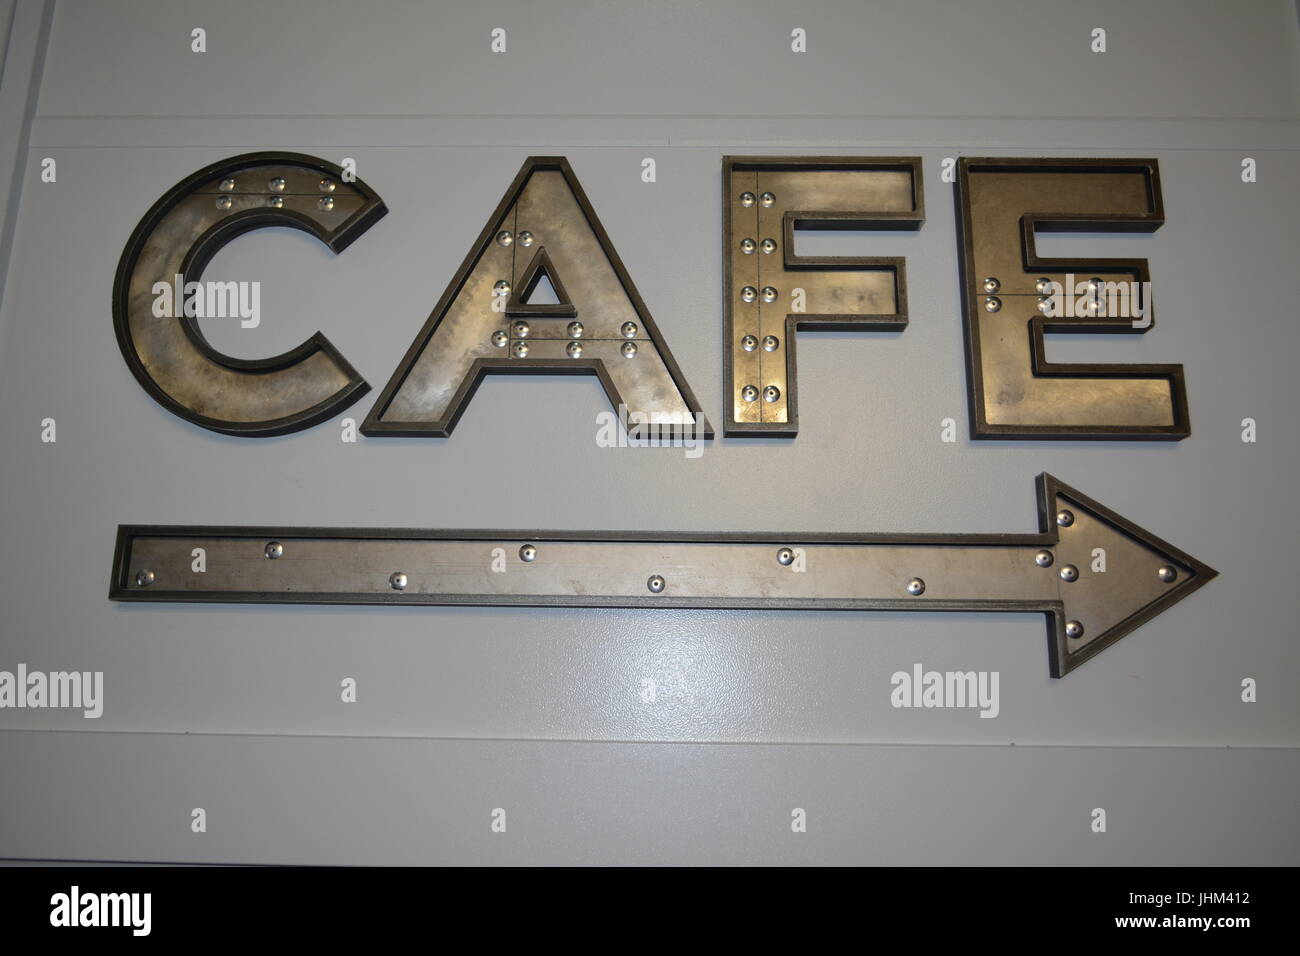 Large metal letters direction sign and arrow pointing to cafe re indoor cafe sign re eating and drinking re socialising meeting friends Stock Photo